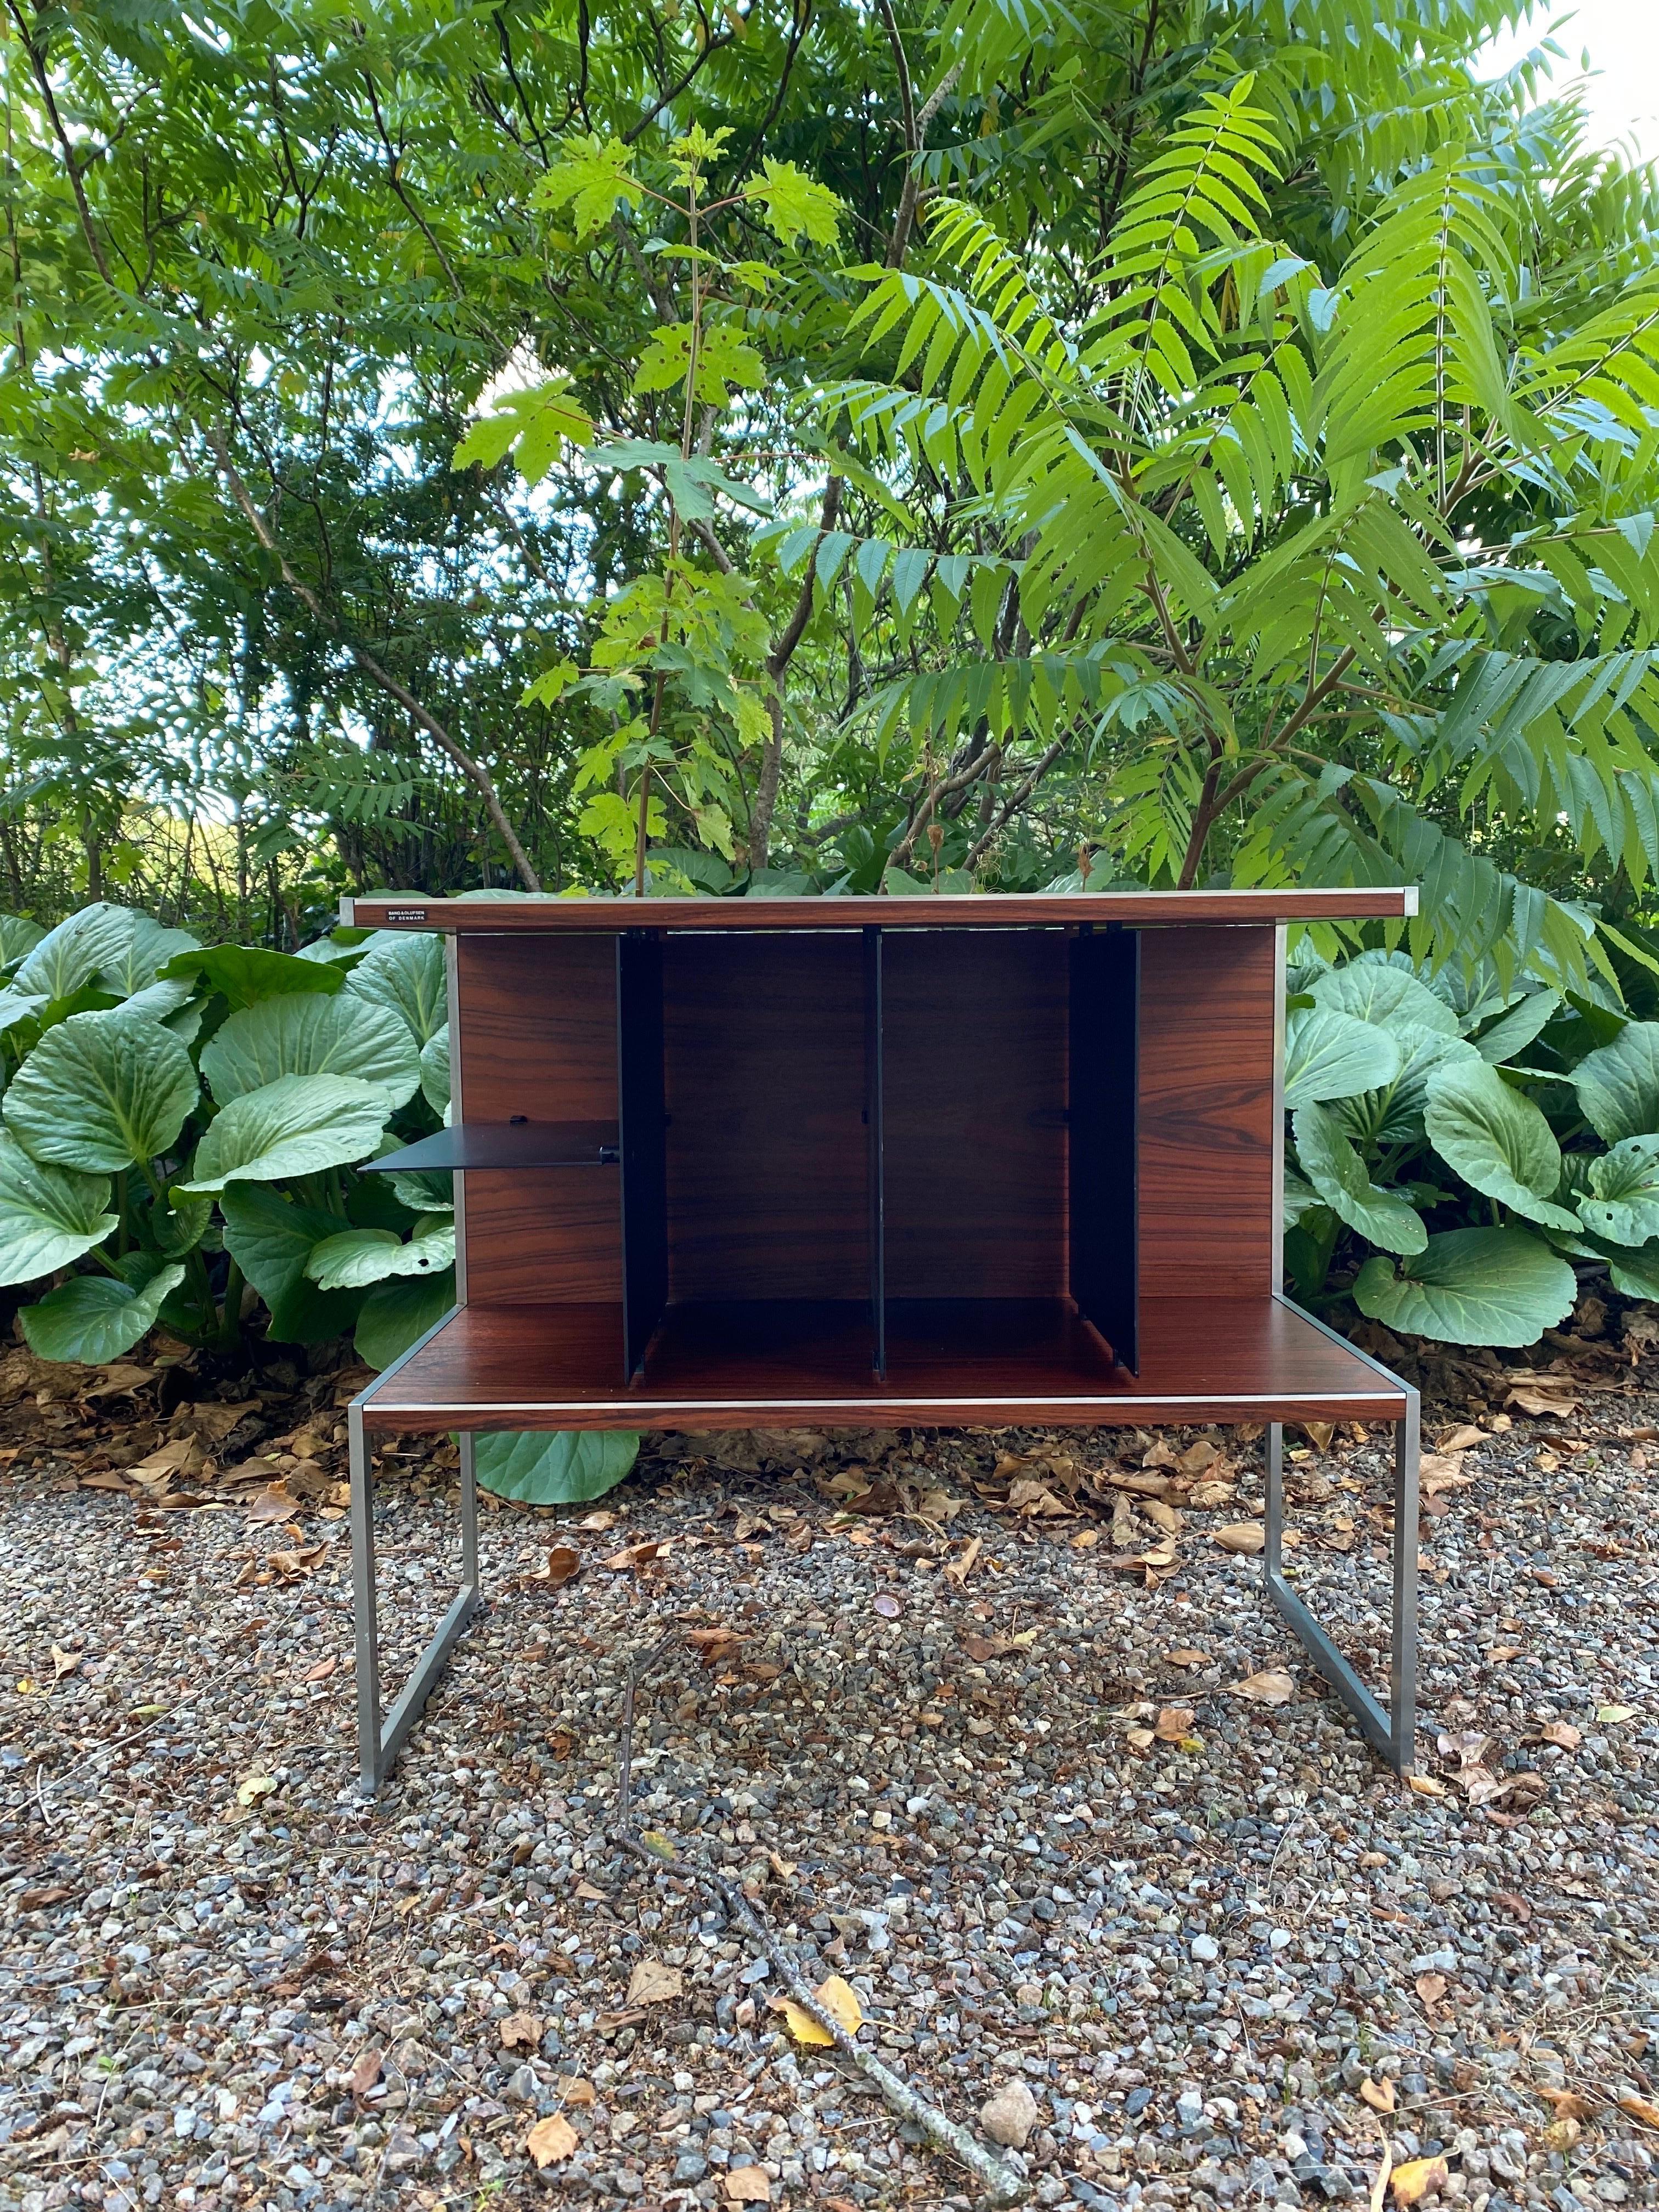 Vintage cabinet for storing hi-fi equipment. Made by Bang & Olufsen and designed by the danish designer Jacobsen in the 1980s.

One of the few companies did made their own cabinet, was Bang & Olufsen. Bang & Olufsen is one of the most respected